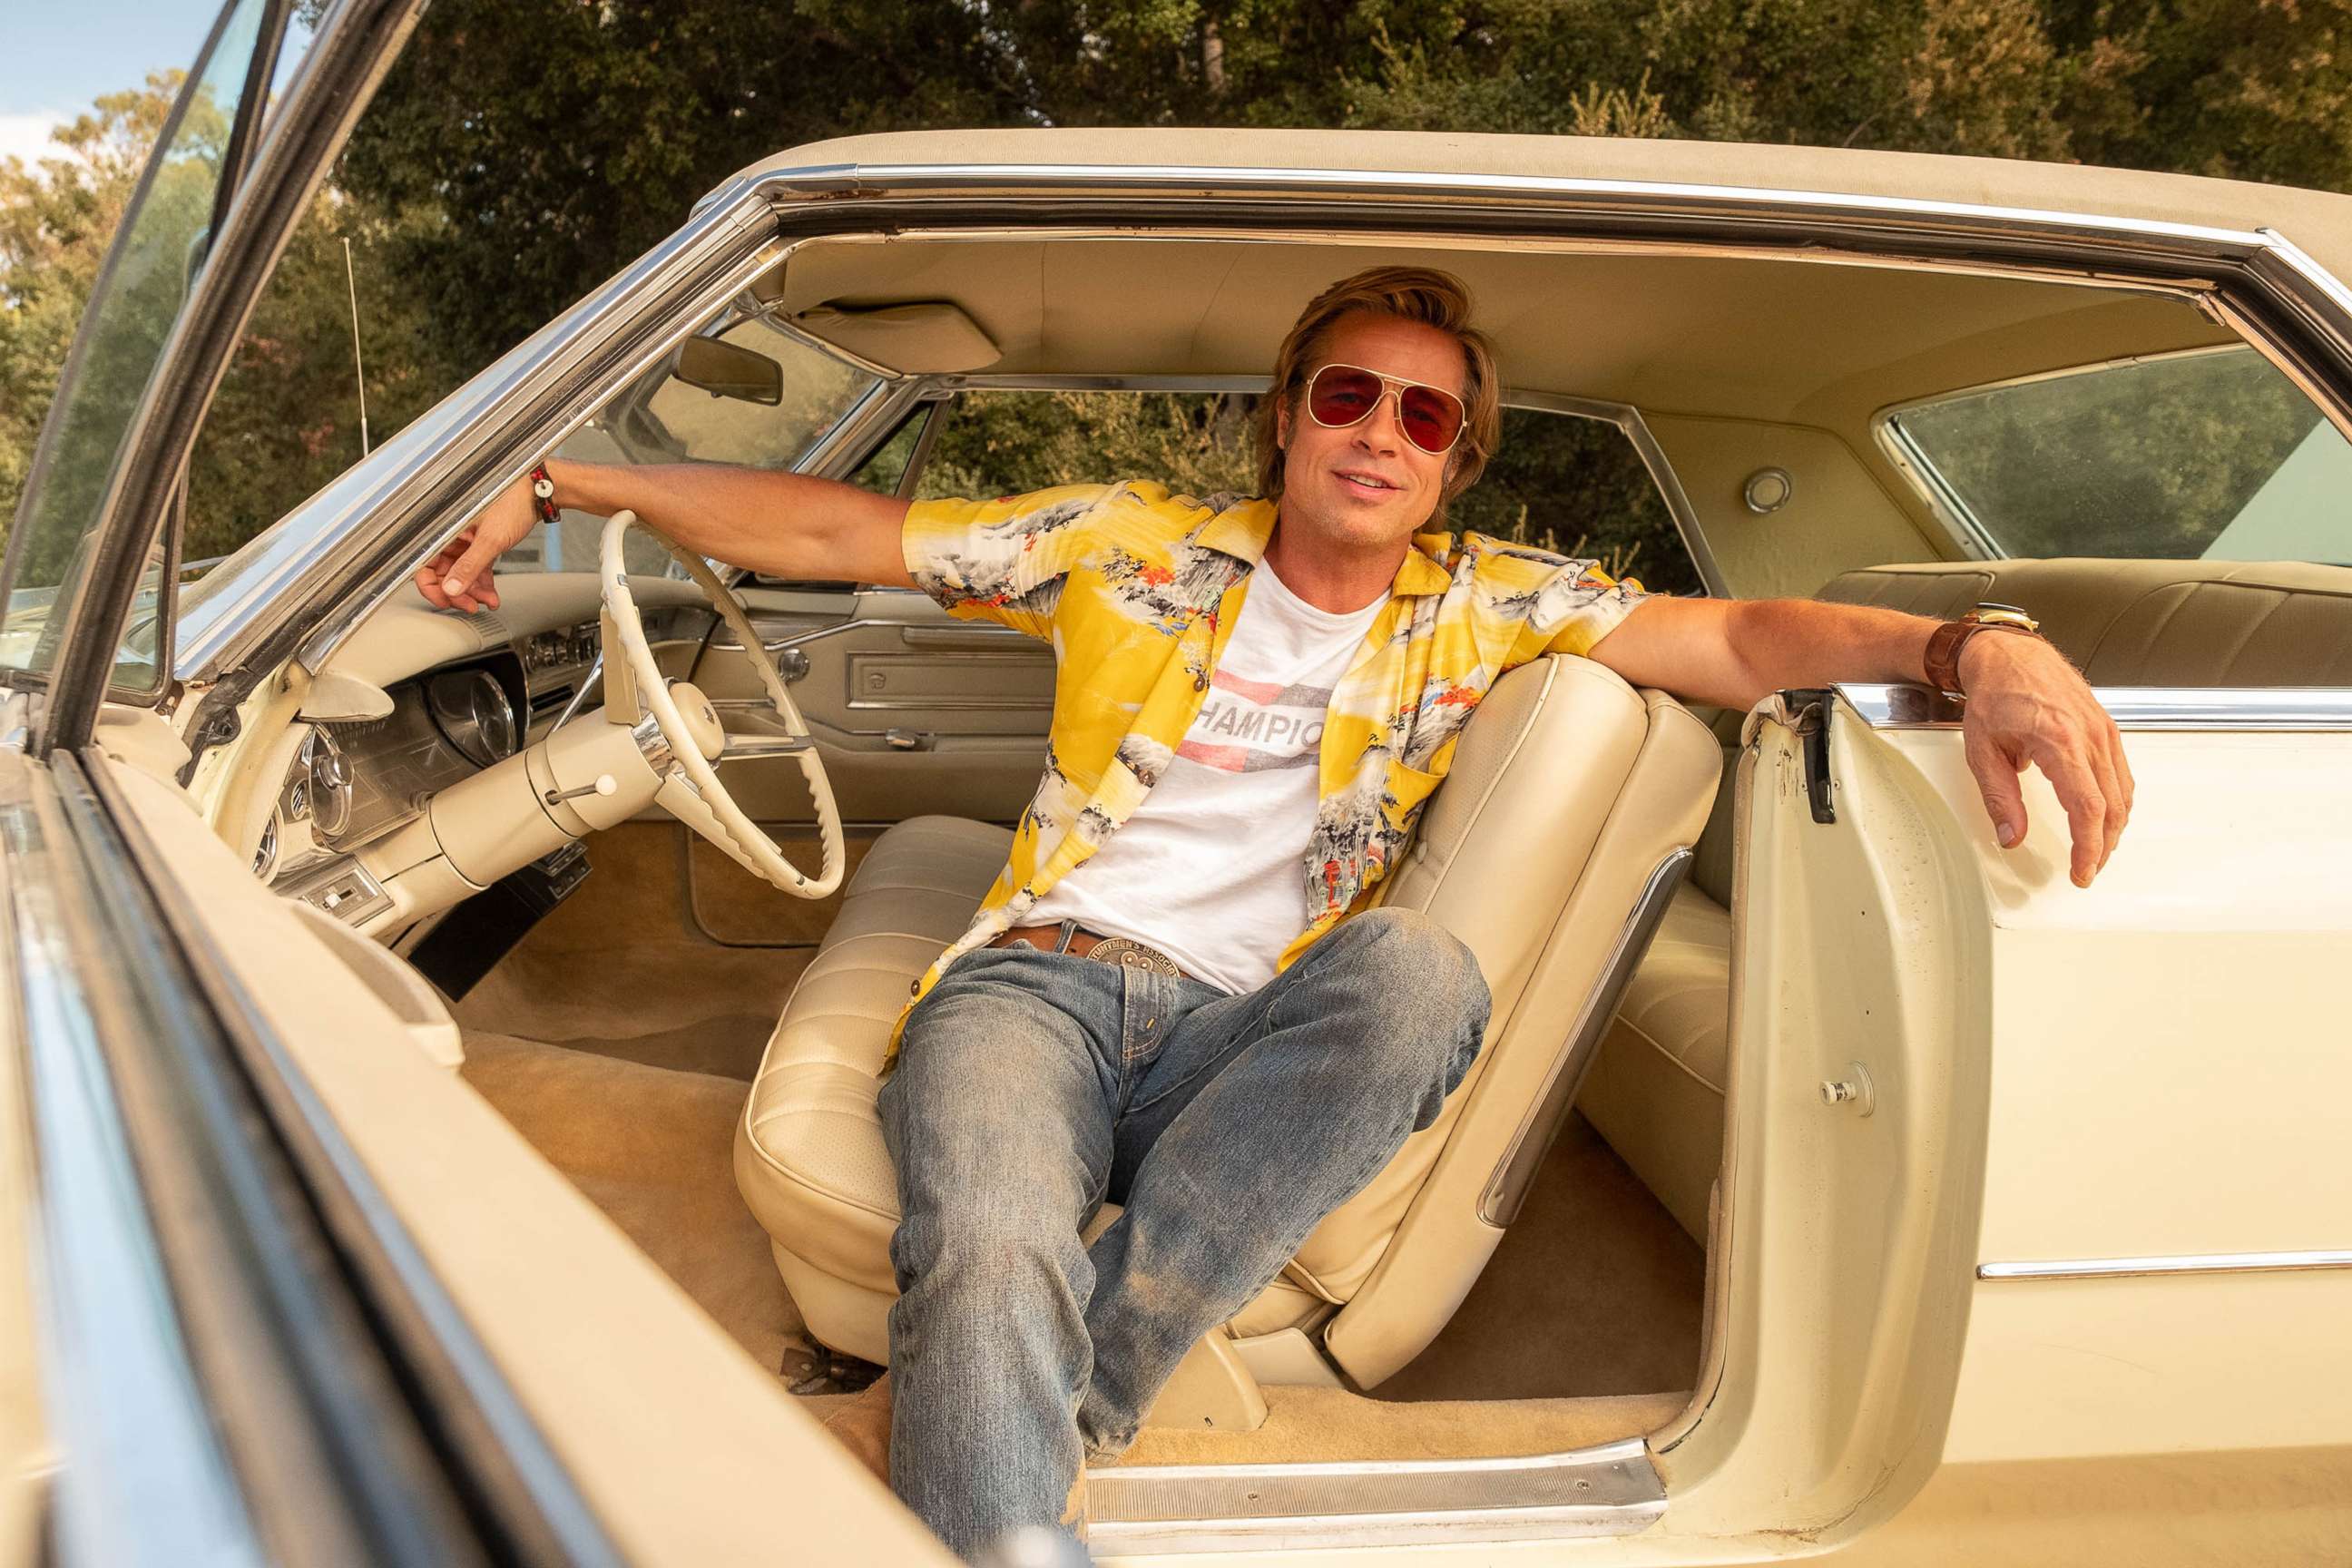 PHOTO: Brad Pitt in "Once Upon A Time In Hollywood".